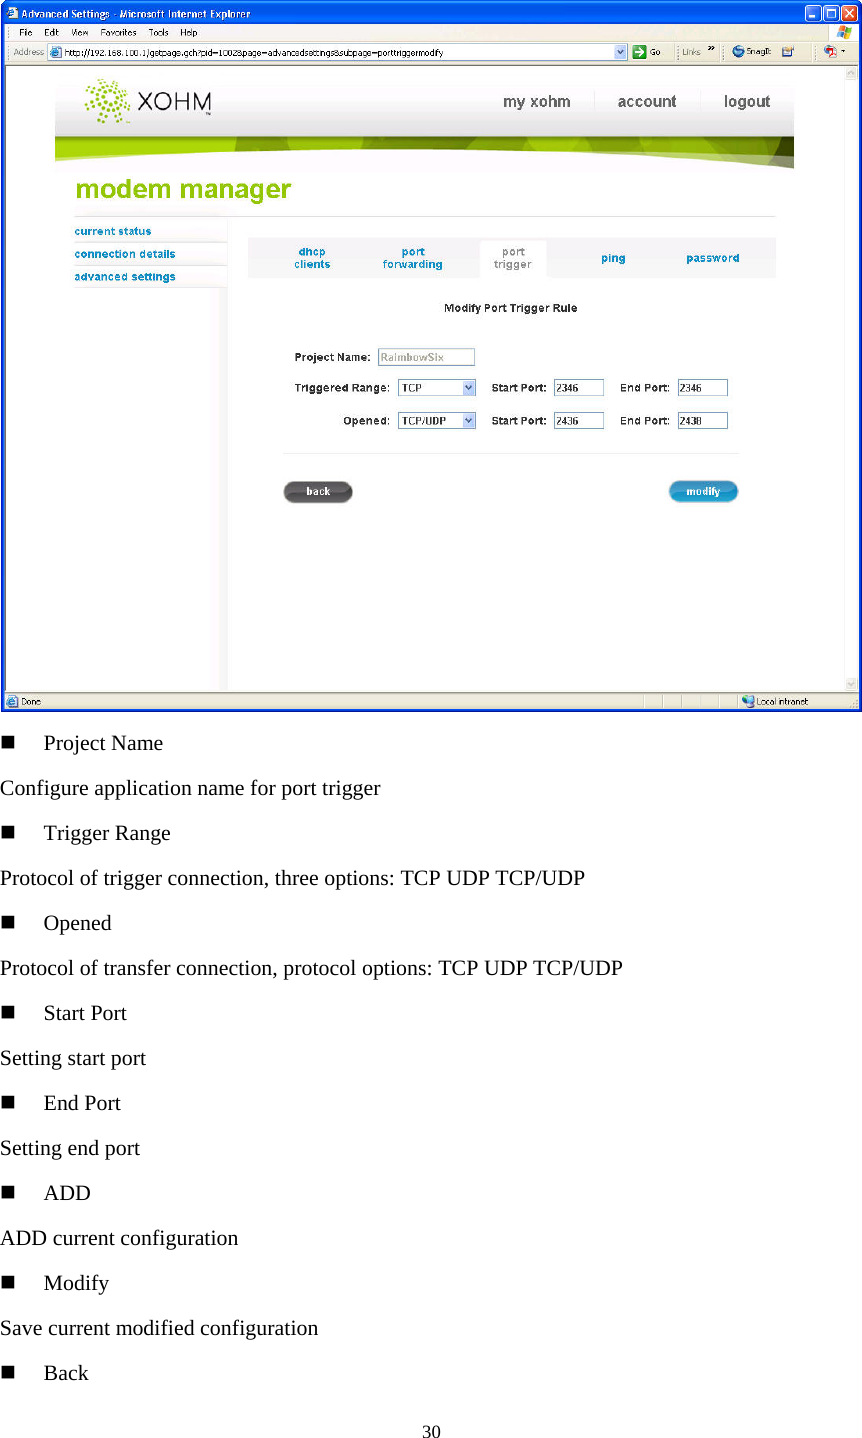 30     Project Name Configure application name for port trigger   Trigger Range Protocol of trigger connection, three options: TCP UDP TCP/UDP   Opened Protocol of transfer connection, protocol options: TCP UDP TCP/UDP   Start Port Setting start port   End Port Setting end port   ADD ADD current configuration   Modify Save current modified configuration   Back 